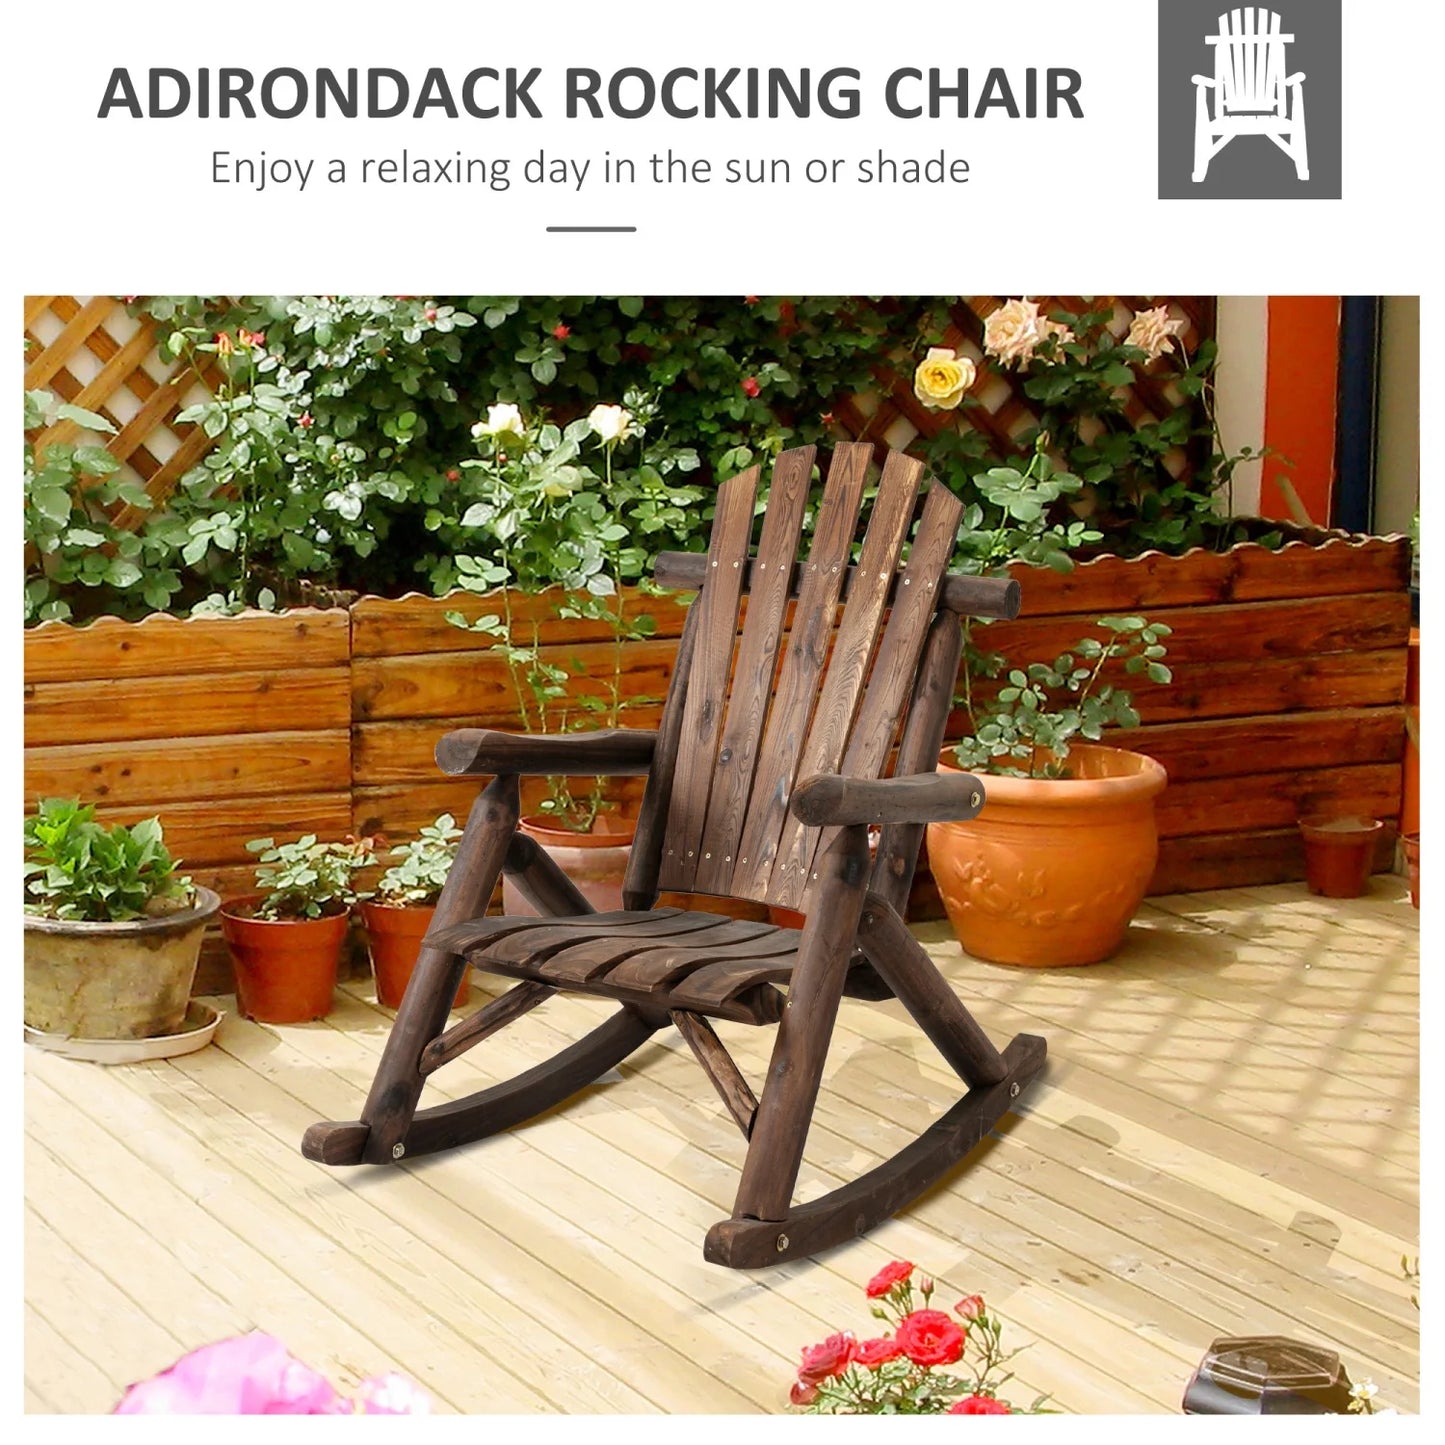 ZJbiubiuHome Outdoor Wooden Rocking Chair  Single-person Adirondack Rocking Patio Chair with Rustic High Back  Slatted Seat and Backrest for Indoor  Backyard  Garden  Carbonized